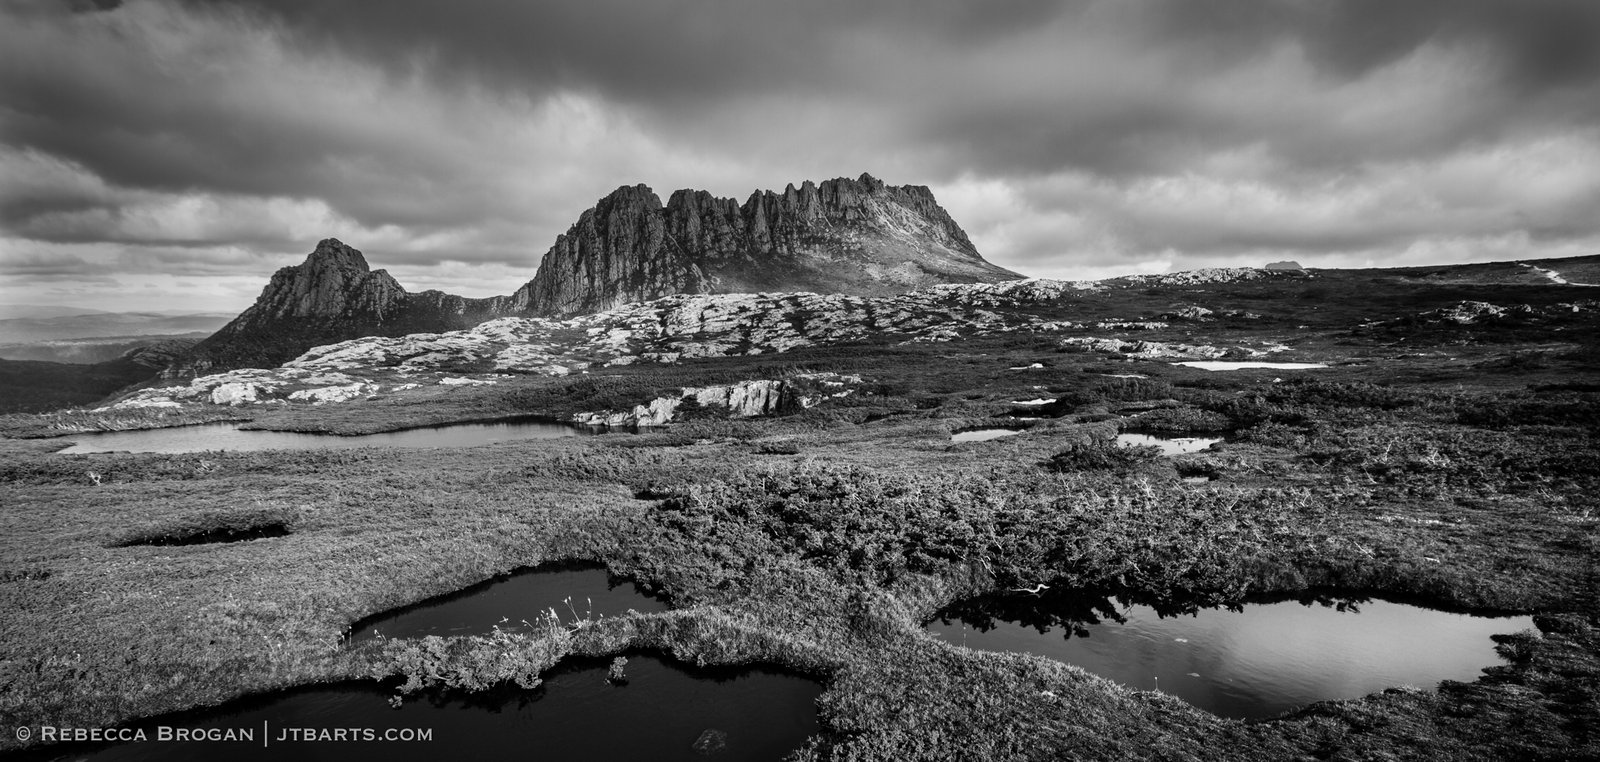 Cradle Mountain from The Overland Track, Tasmania, black and white panorama photo.